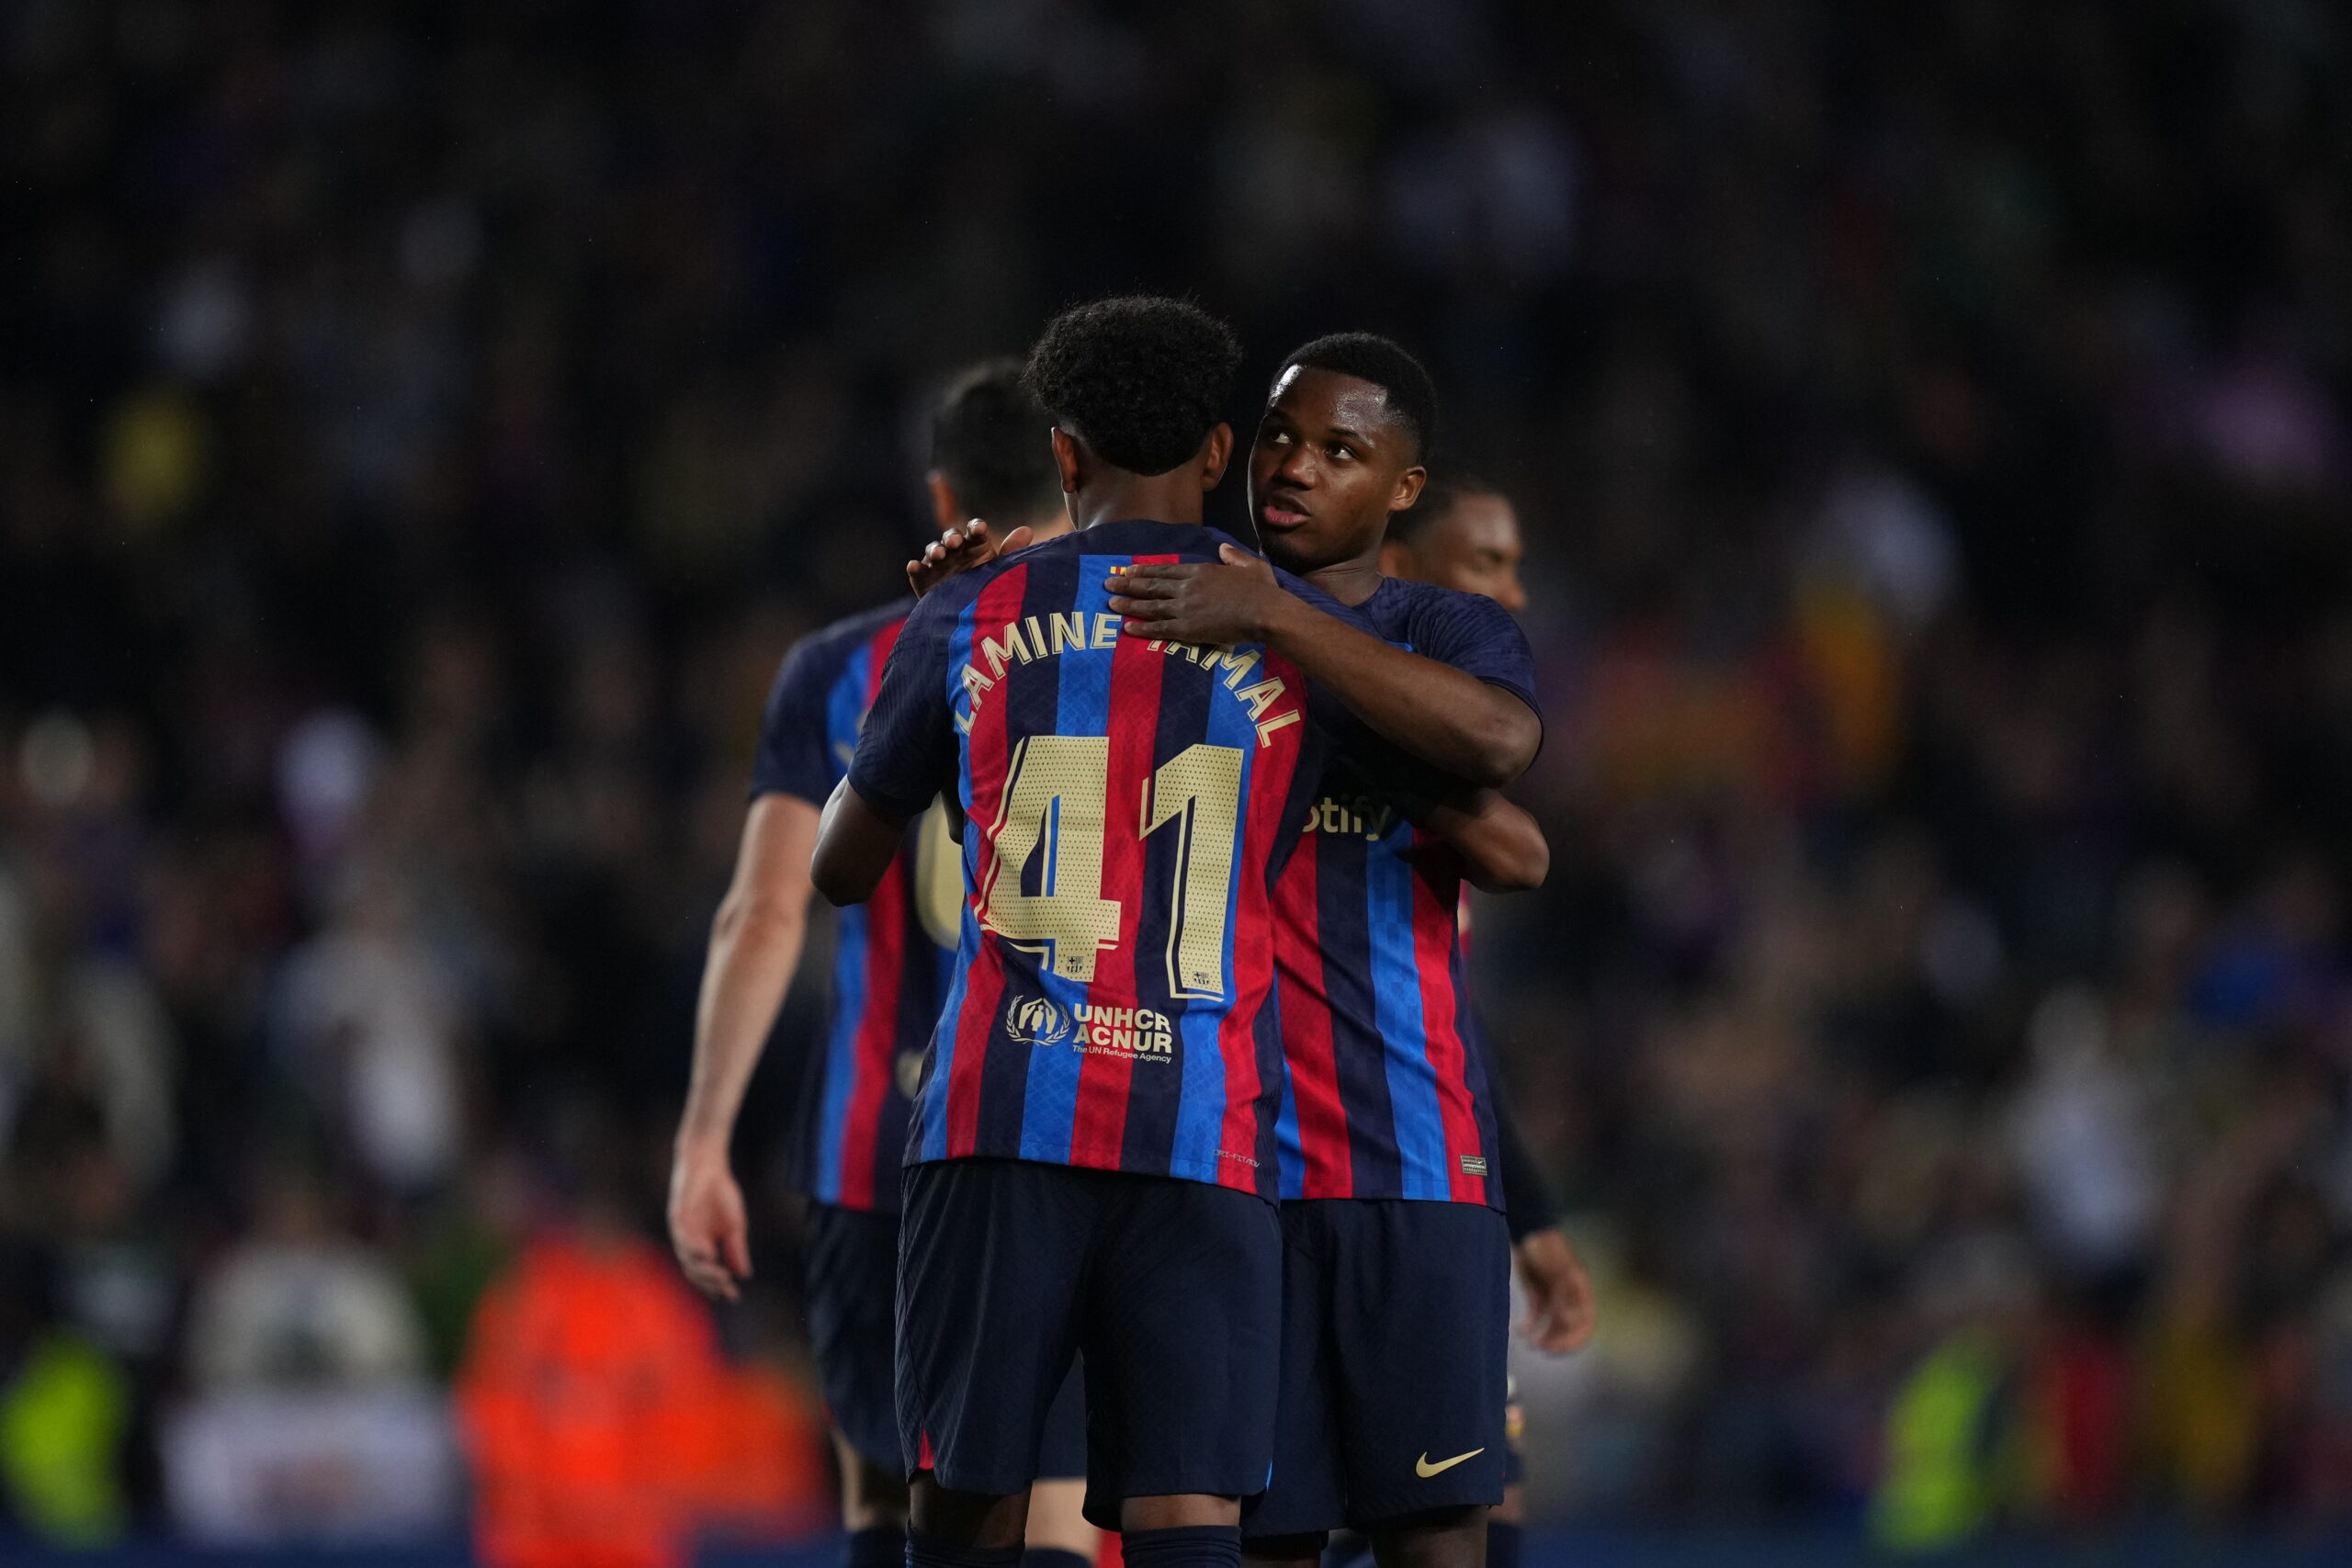 BARCELONA, SPAIN - APRIL 29: Ansu Fati of FC Barcelona embraces teammate Lamine Yamal during the LaLiga Santander match between FC Barcelona and Real Betis at Spotify Camp Nou on April 29, 2023 in Barcelona, Spain.